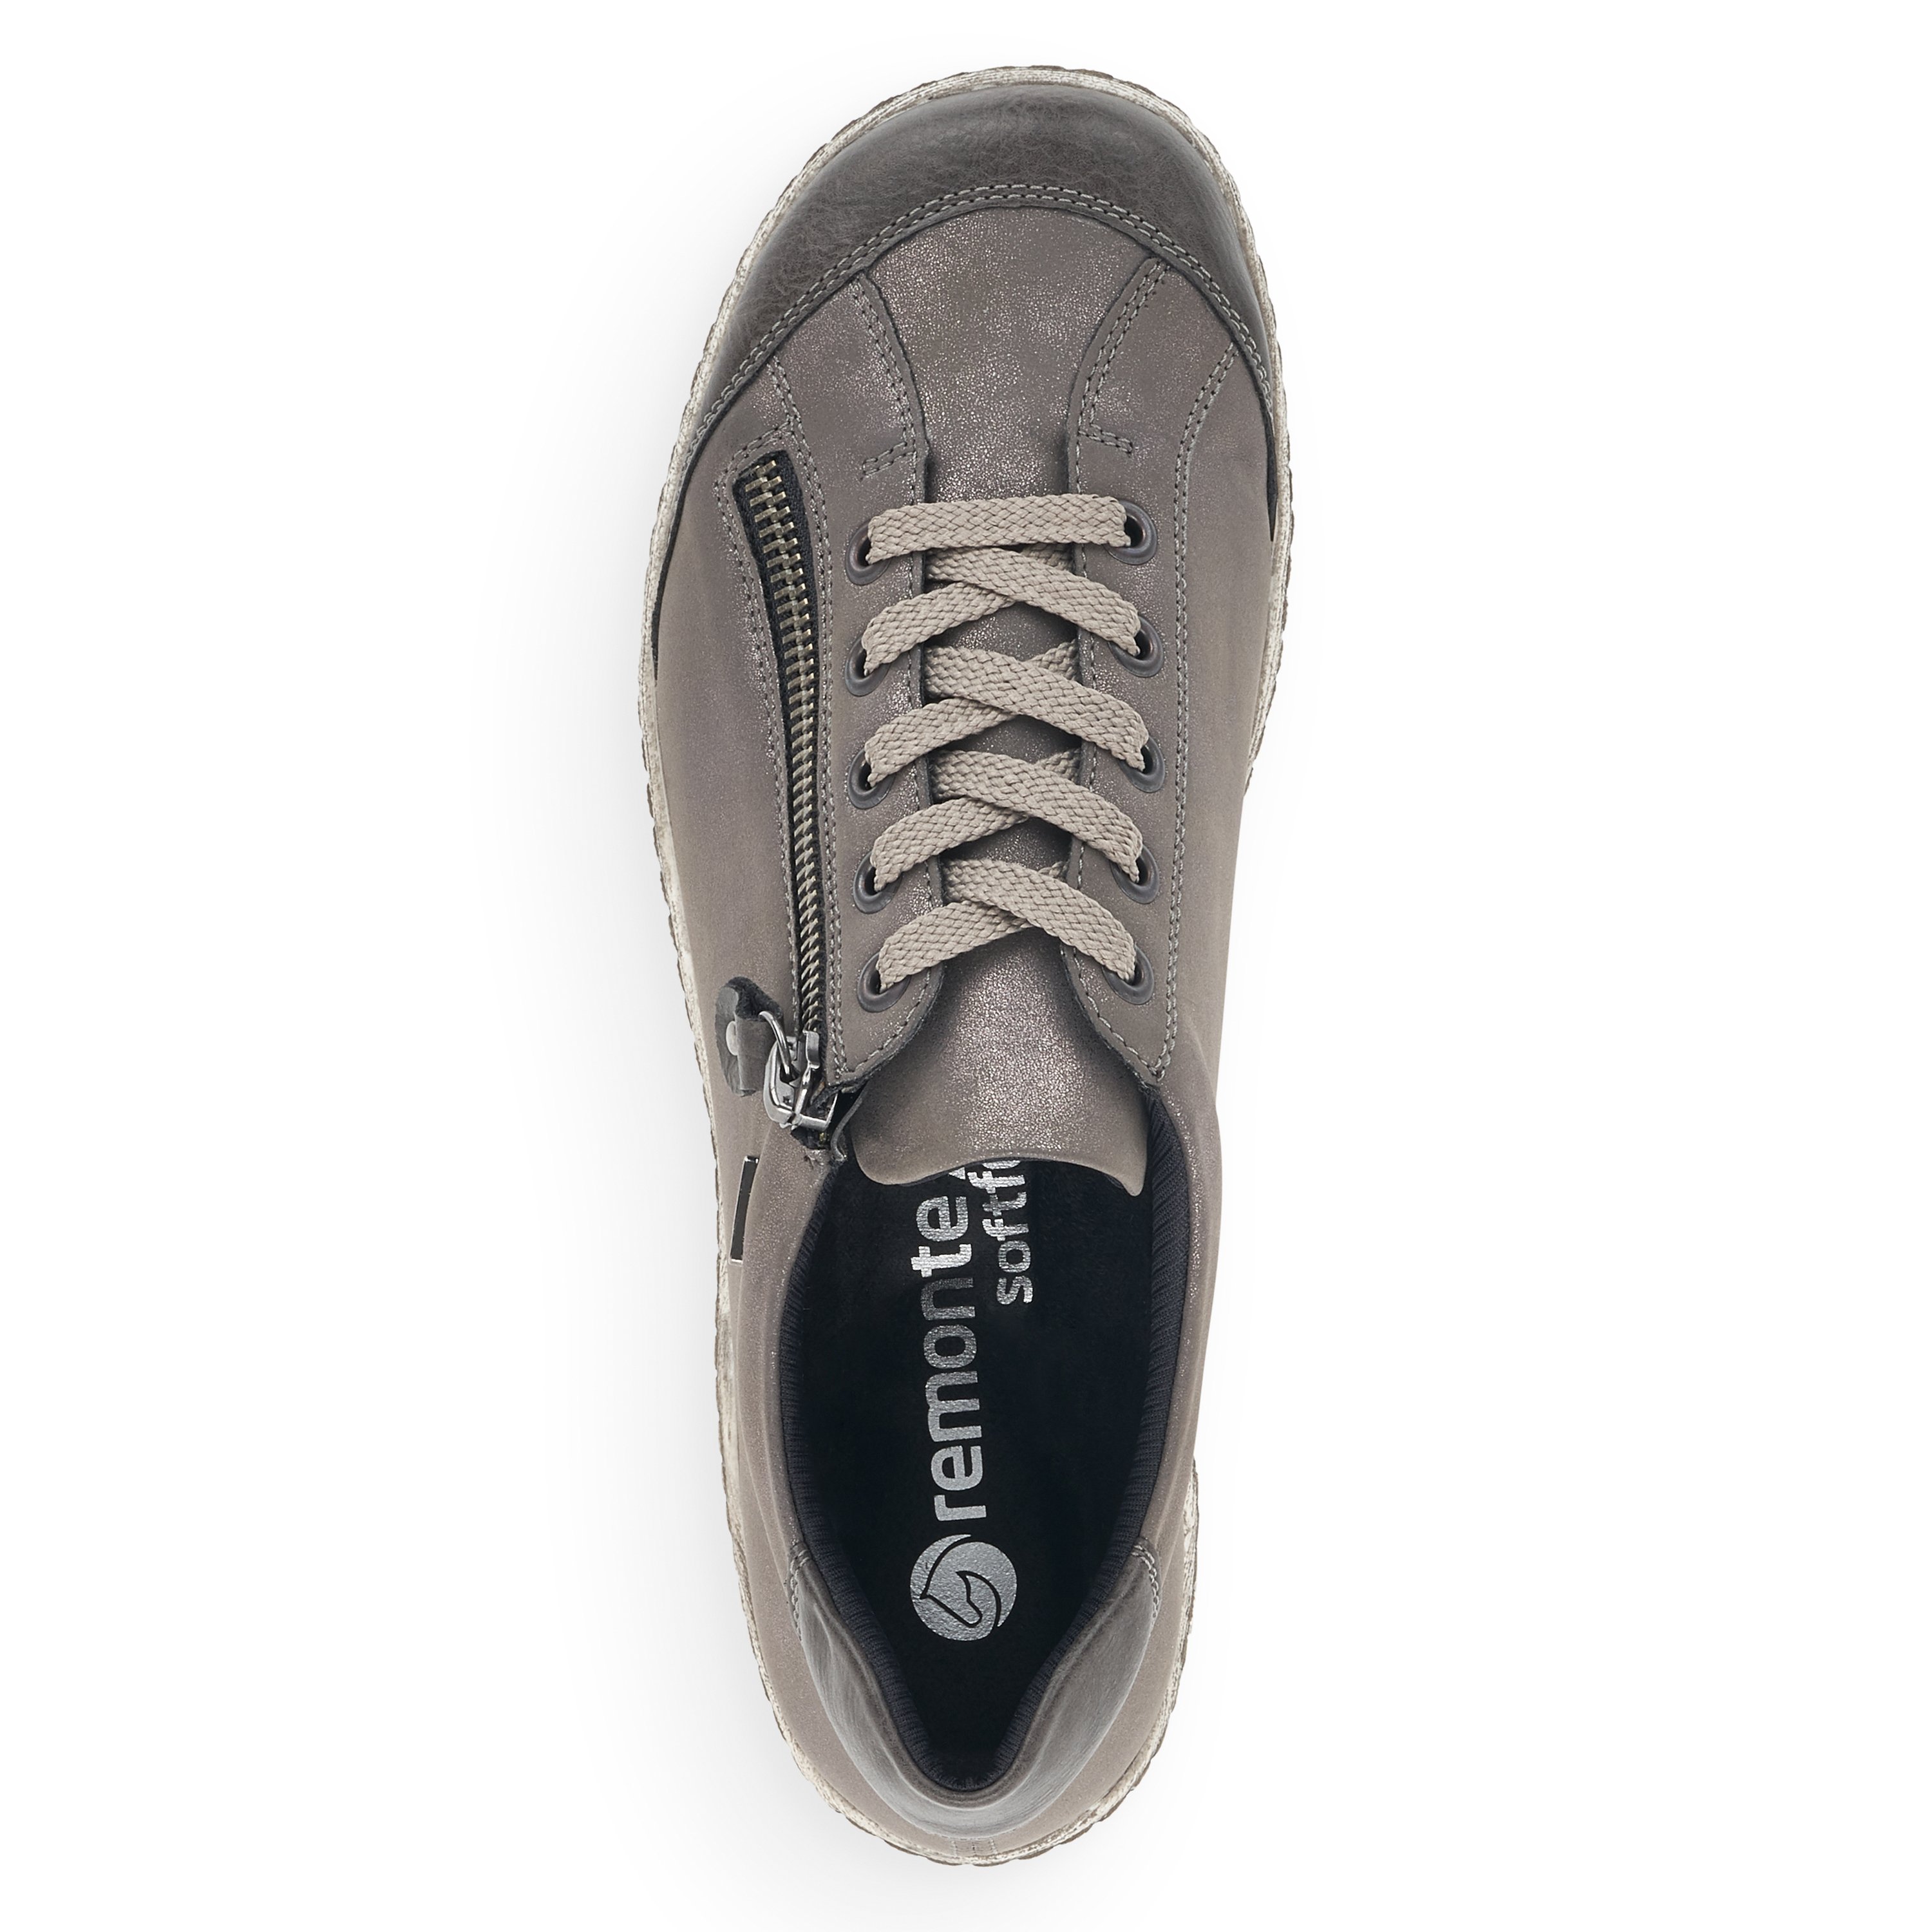 Silver grey remonte women´s lace-up shoes R1402-44 with flexible profile sole. Shoe from the top